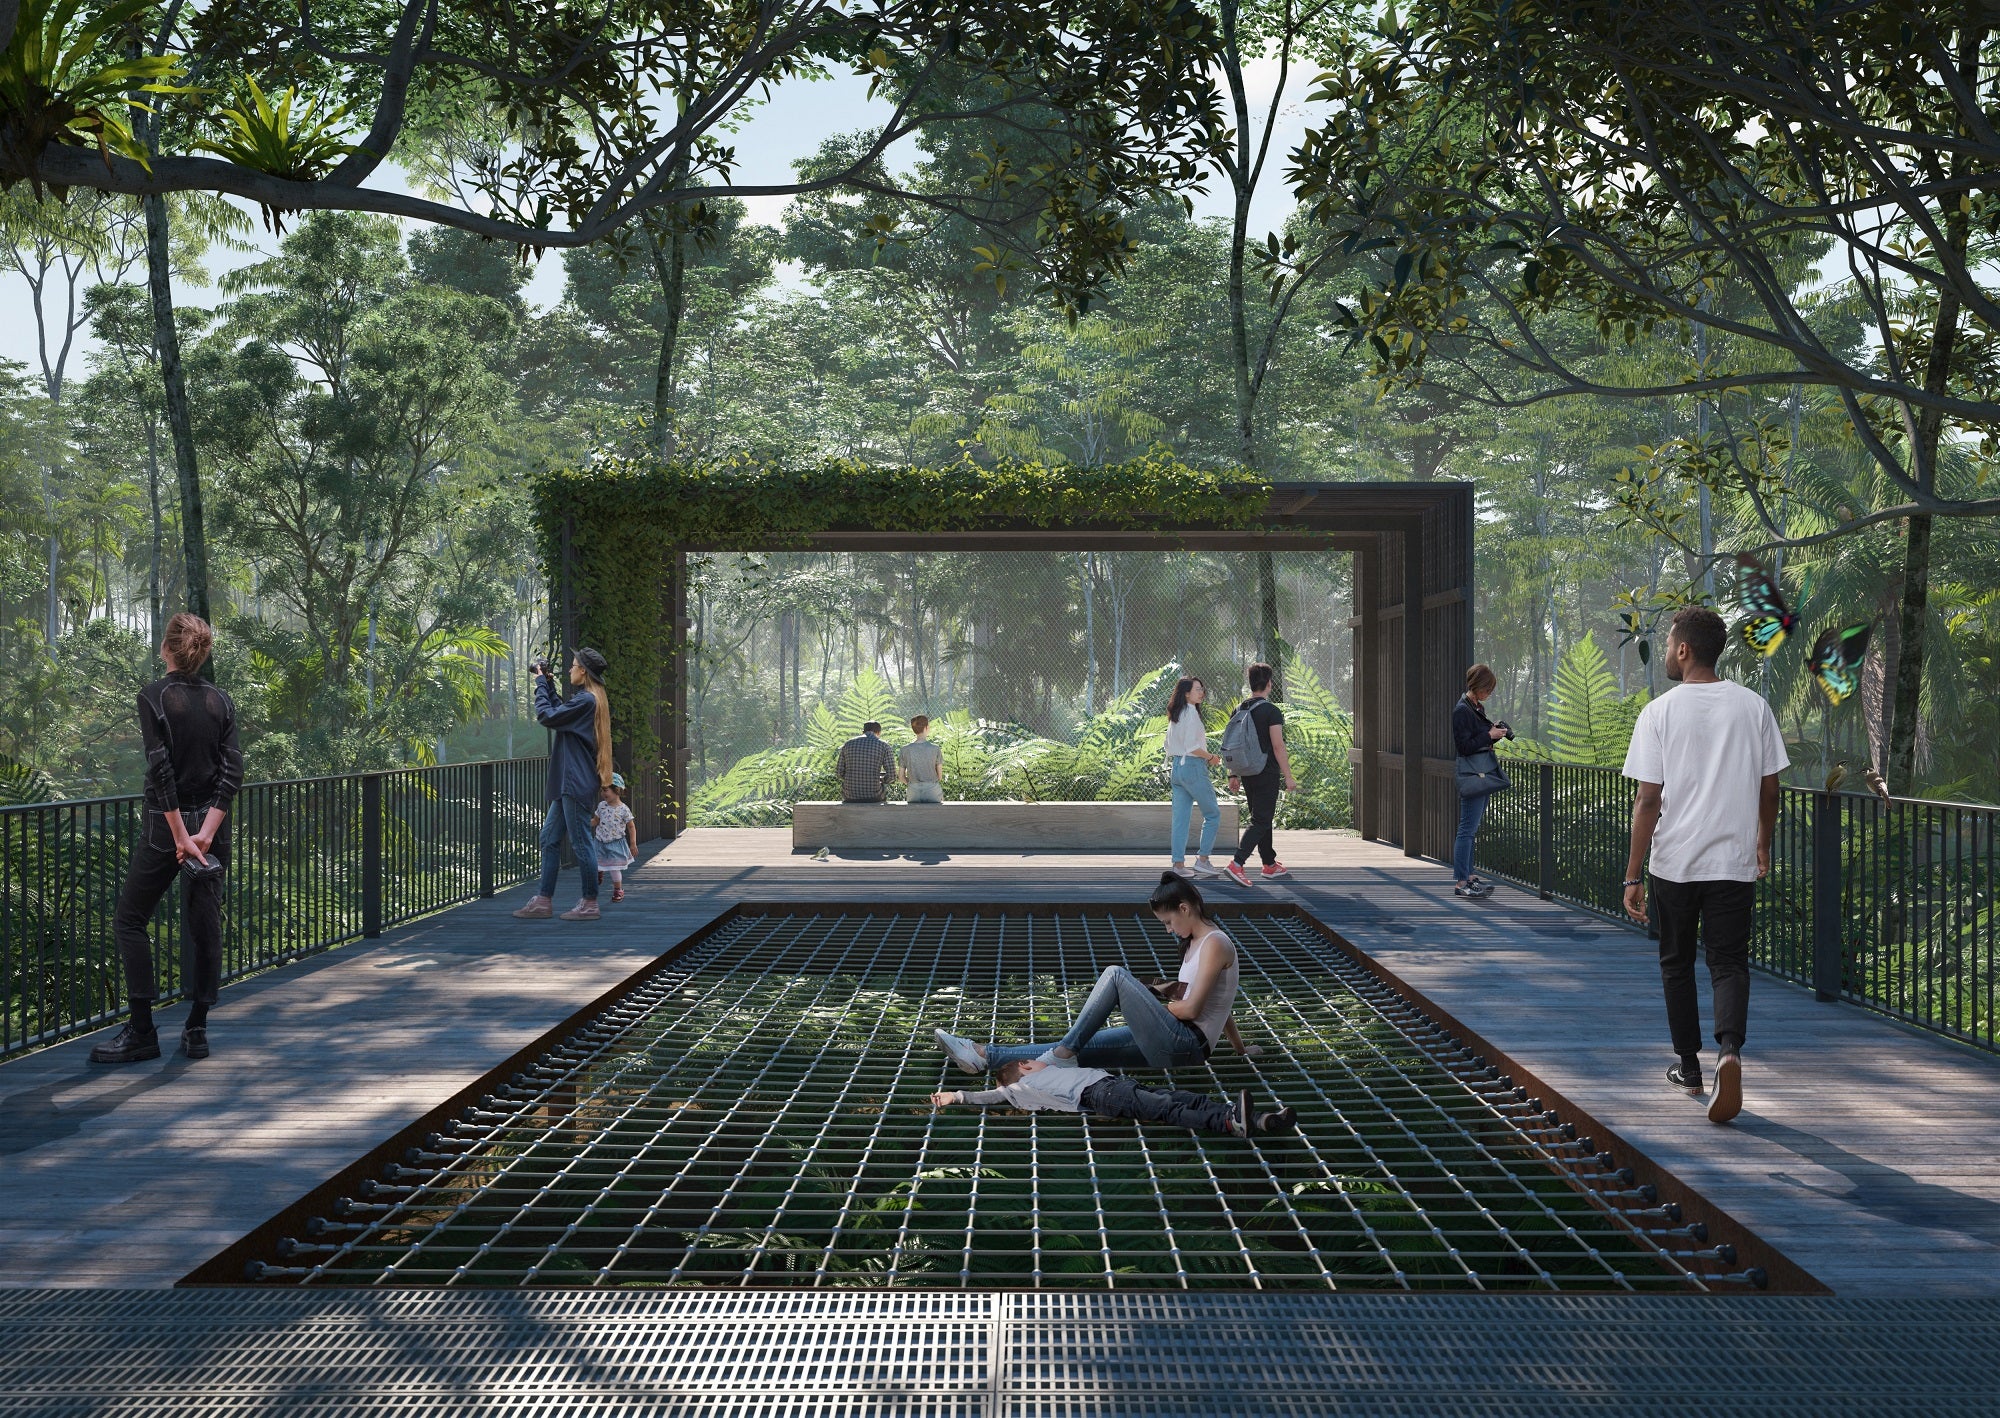 An artist impression of a Treehouse in the Sunshine Coast Ecological Park draft master plan. 